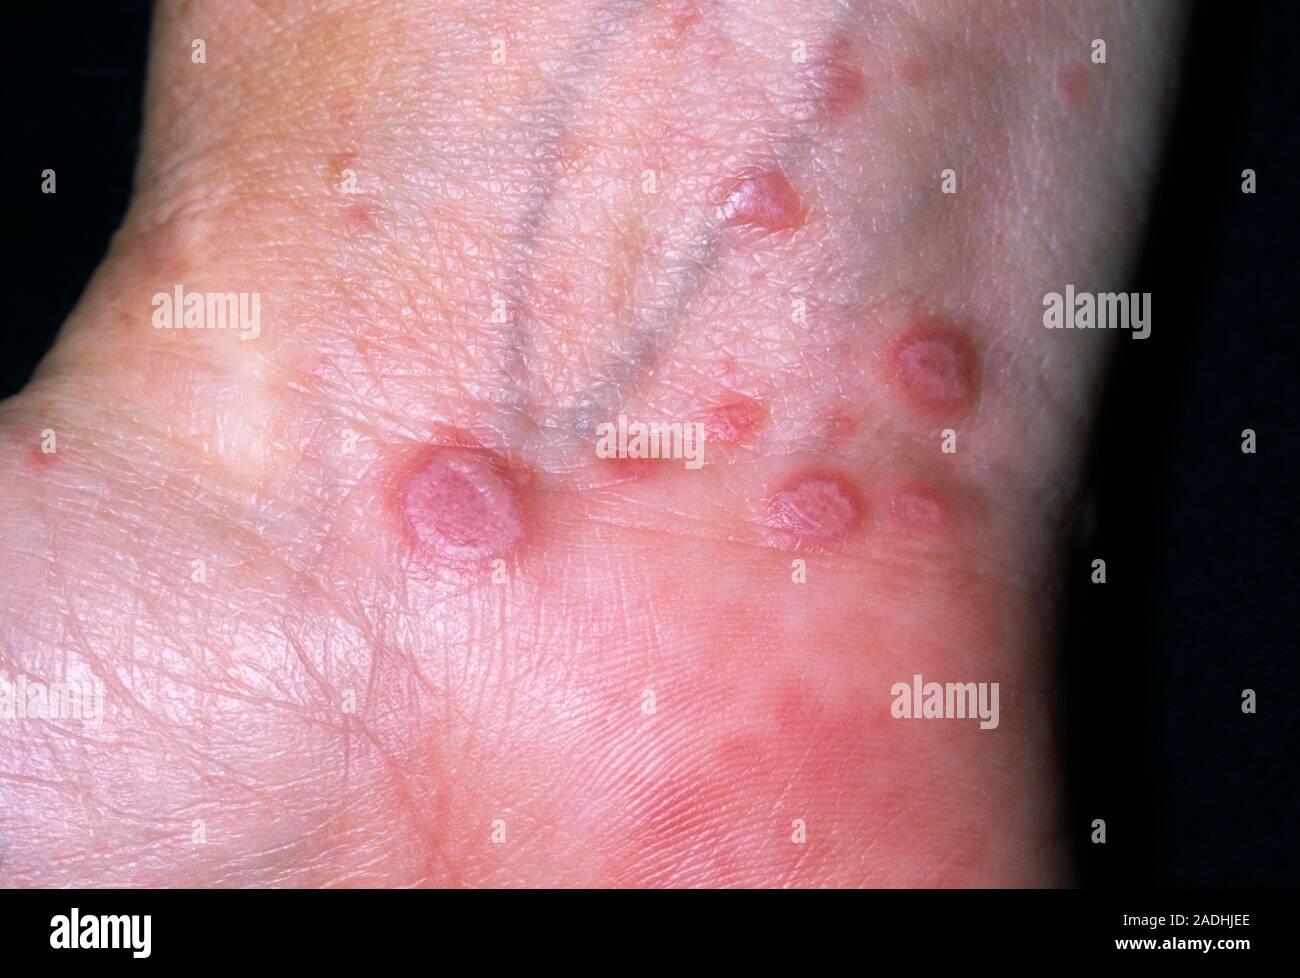 Lichen planus skin disease. Lesions on the inside of the wrist of a 48-year-old female patient, caused by lichen planus. Lichen planus is a chronic sk Stock Photo